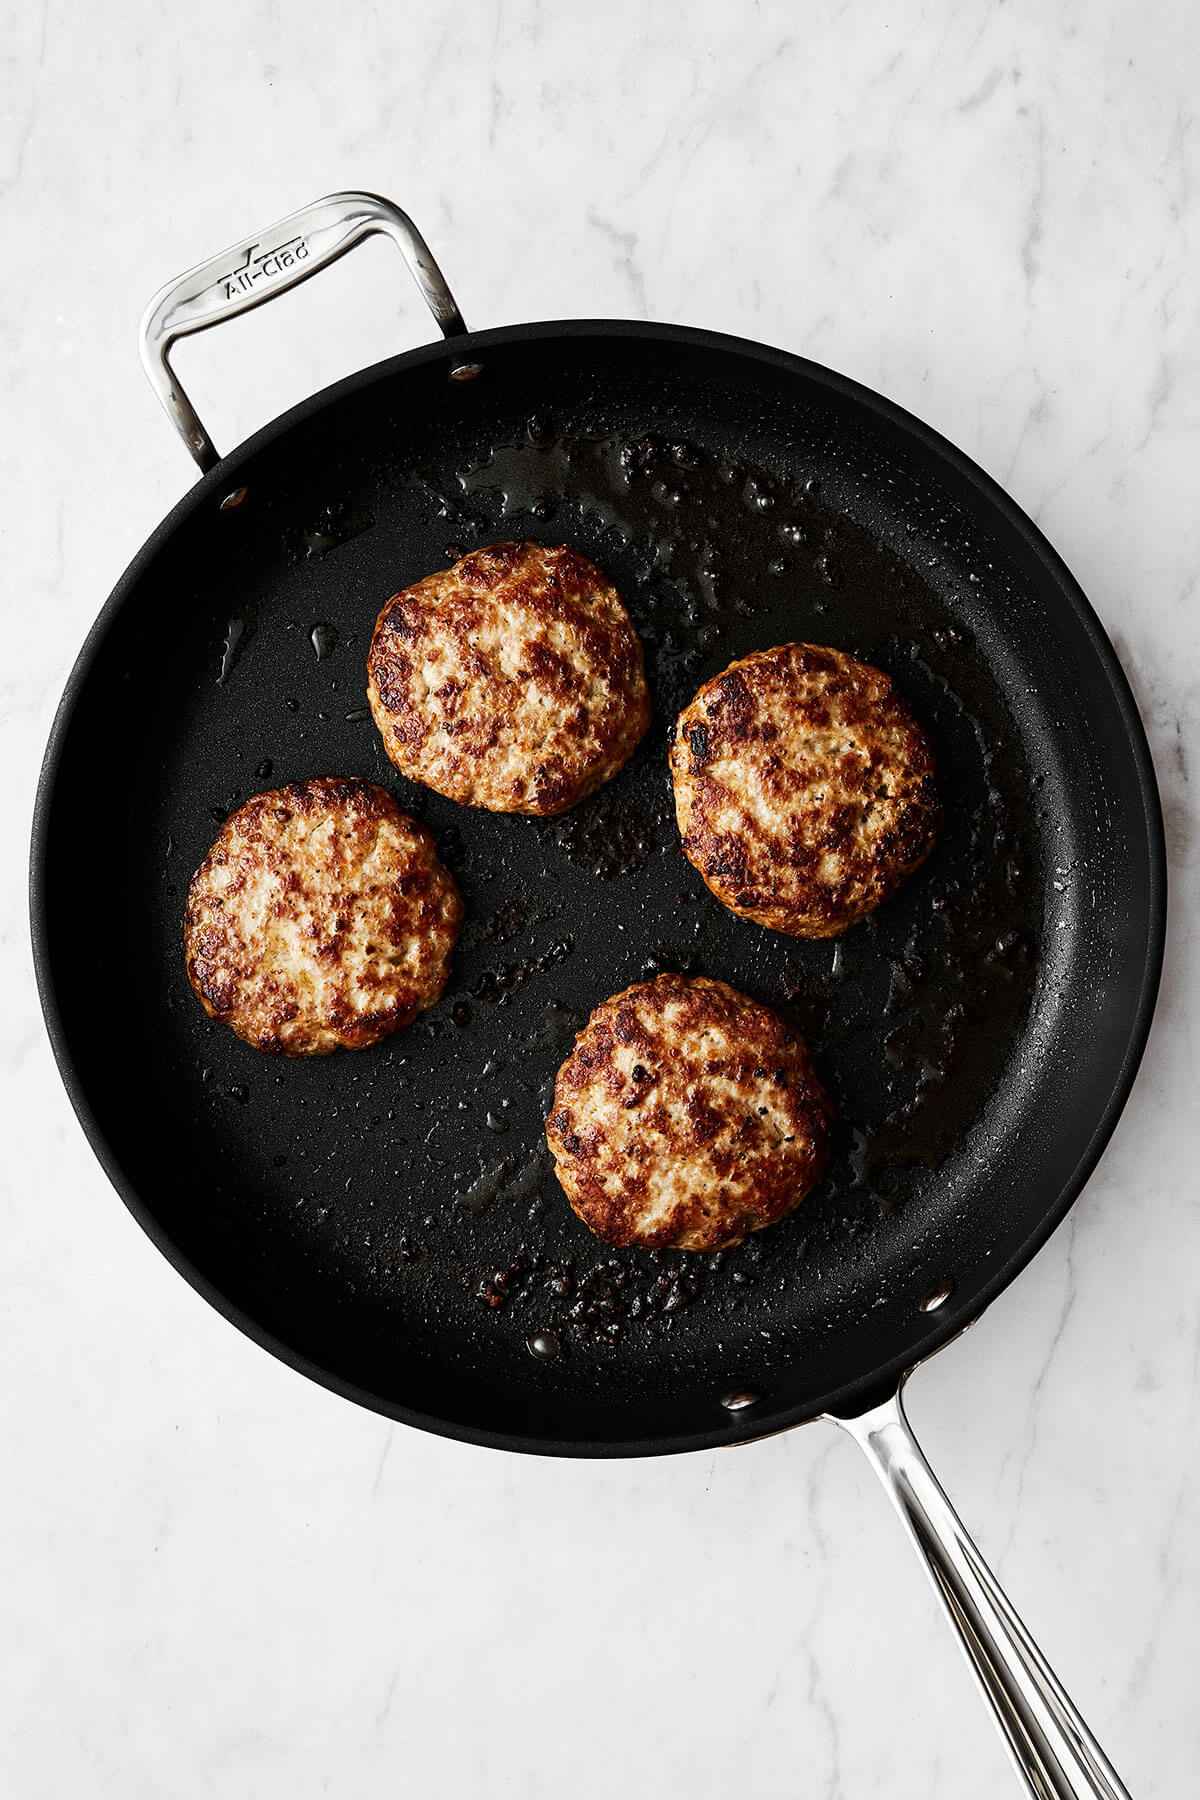 Cooking turkey burgers in a pan